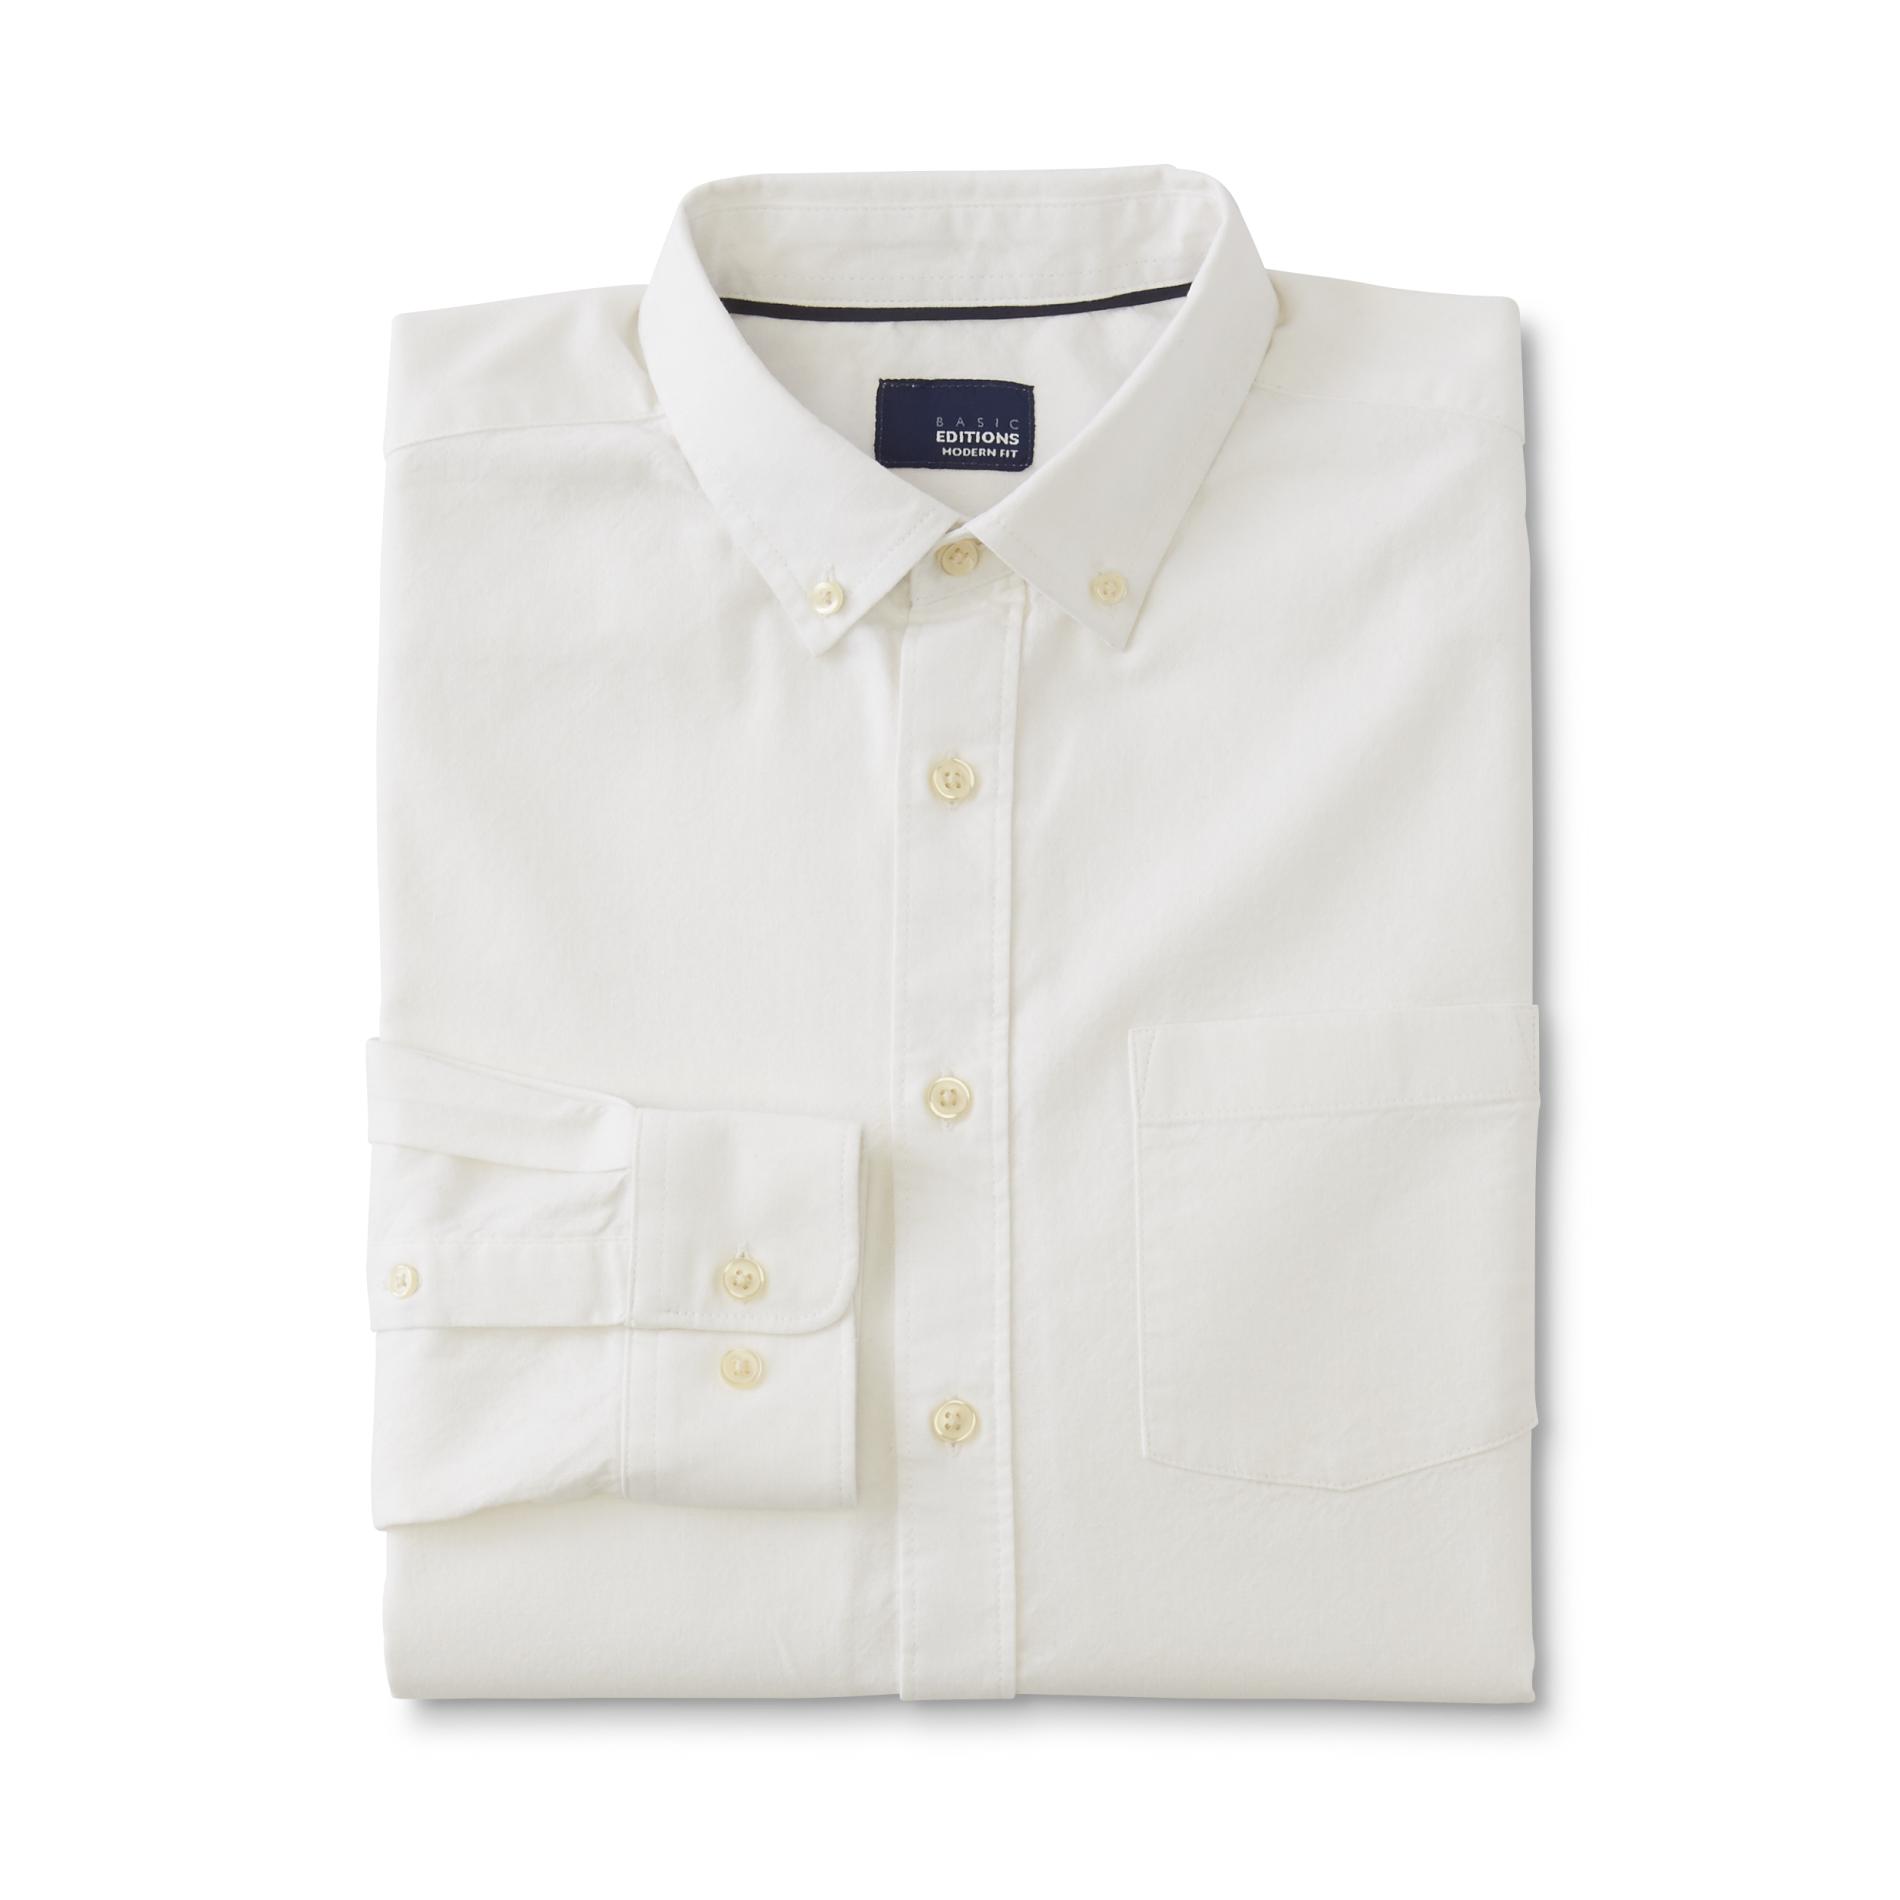 Basic Editions Men's Big & Tall Button-Front Oxford Shirt